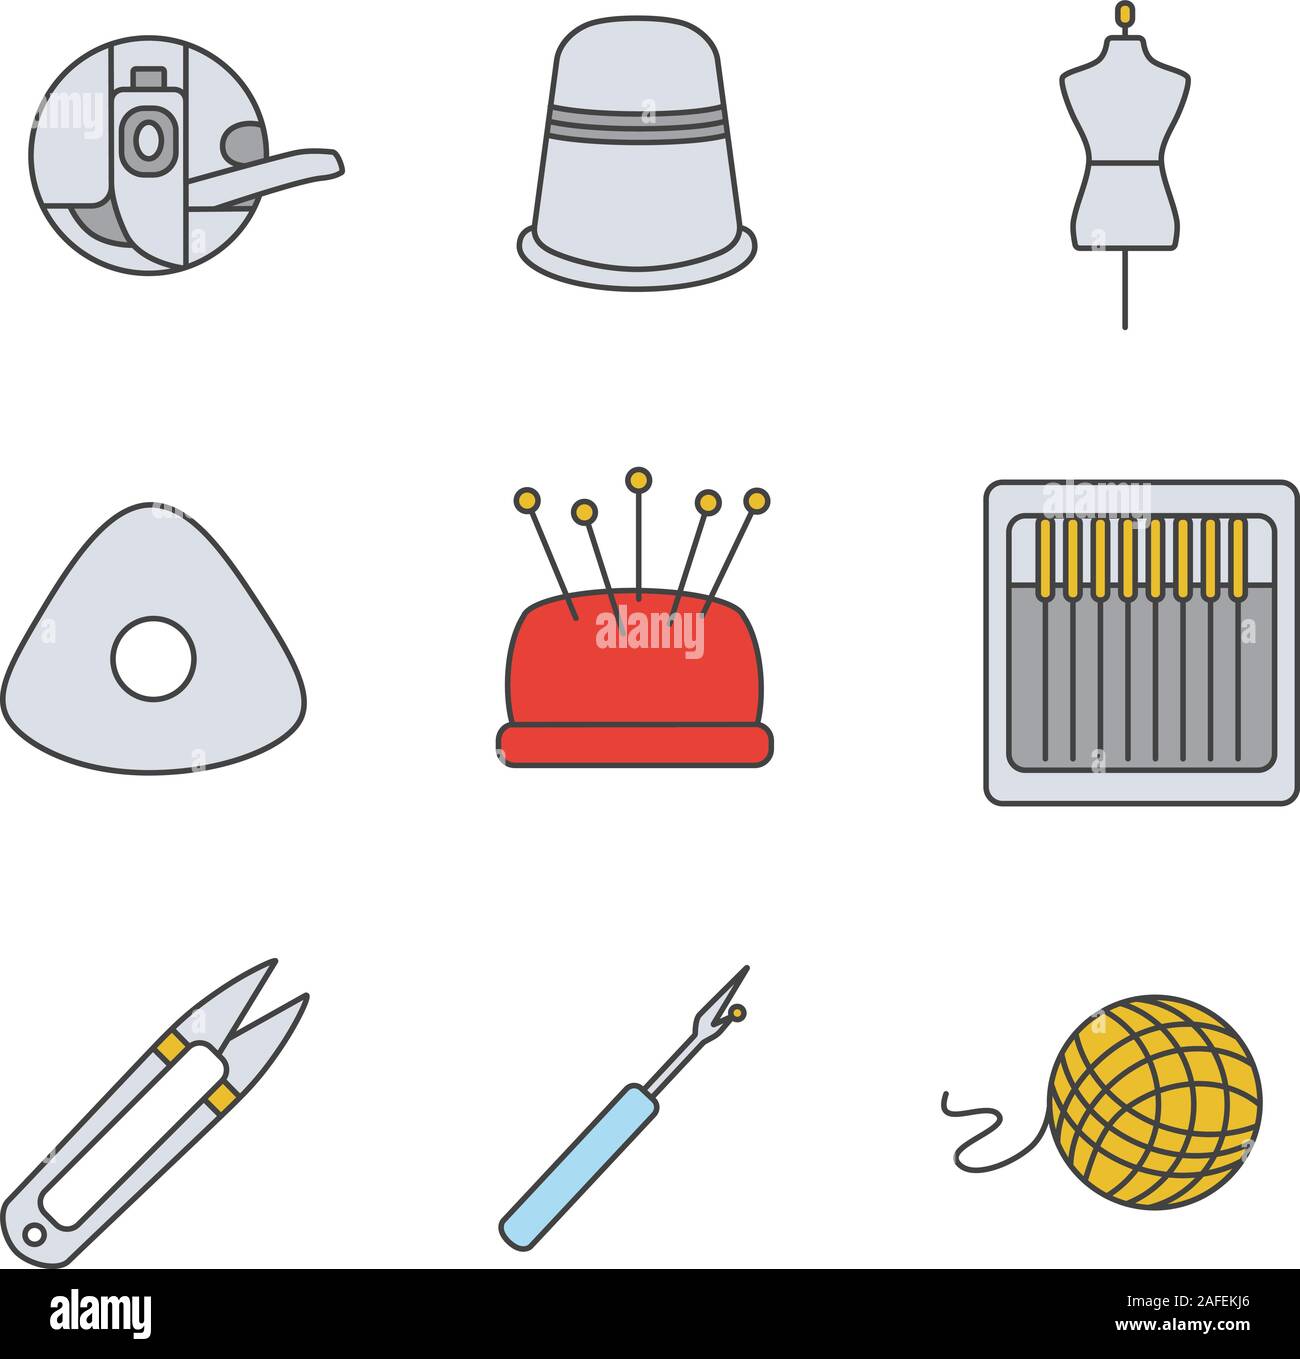 Tailoring color icons set. Bobbin case, sewing thimble, mannequin, chalk, pincushion, needles, thread cutter, seam ripper, wool clew. Isolated vector Stock Vector